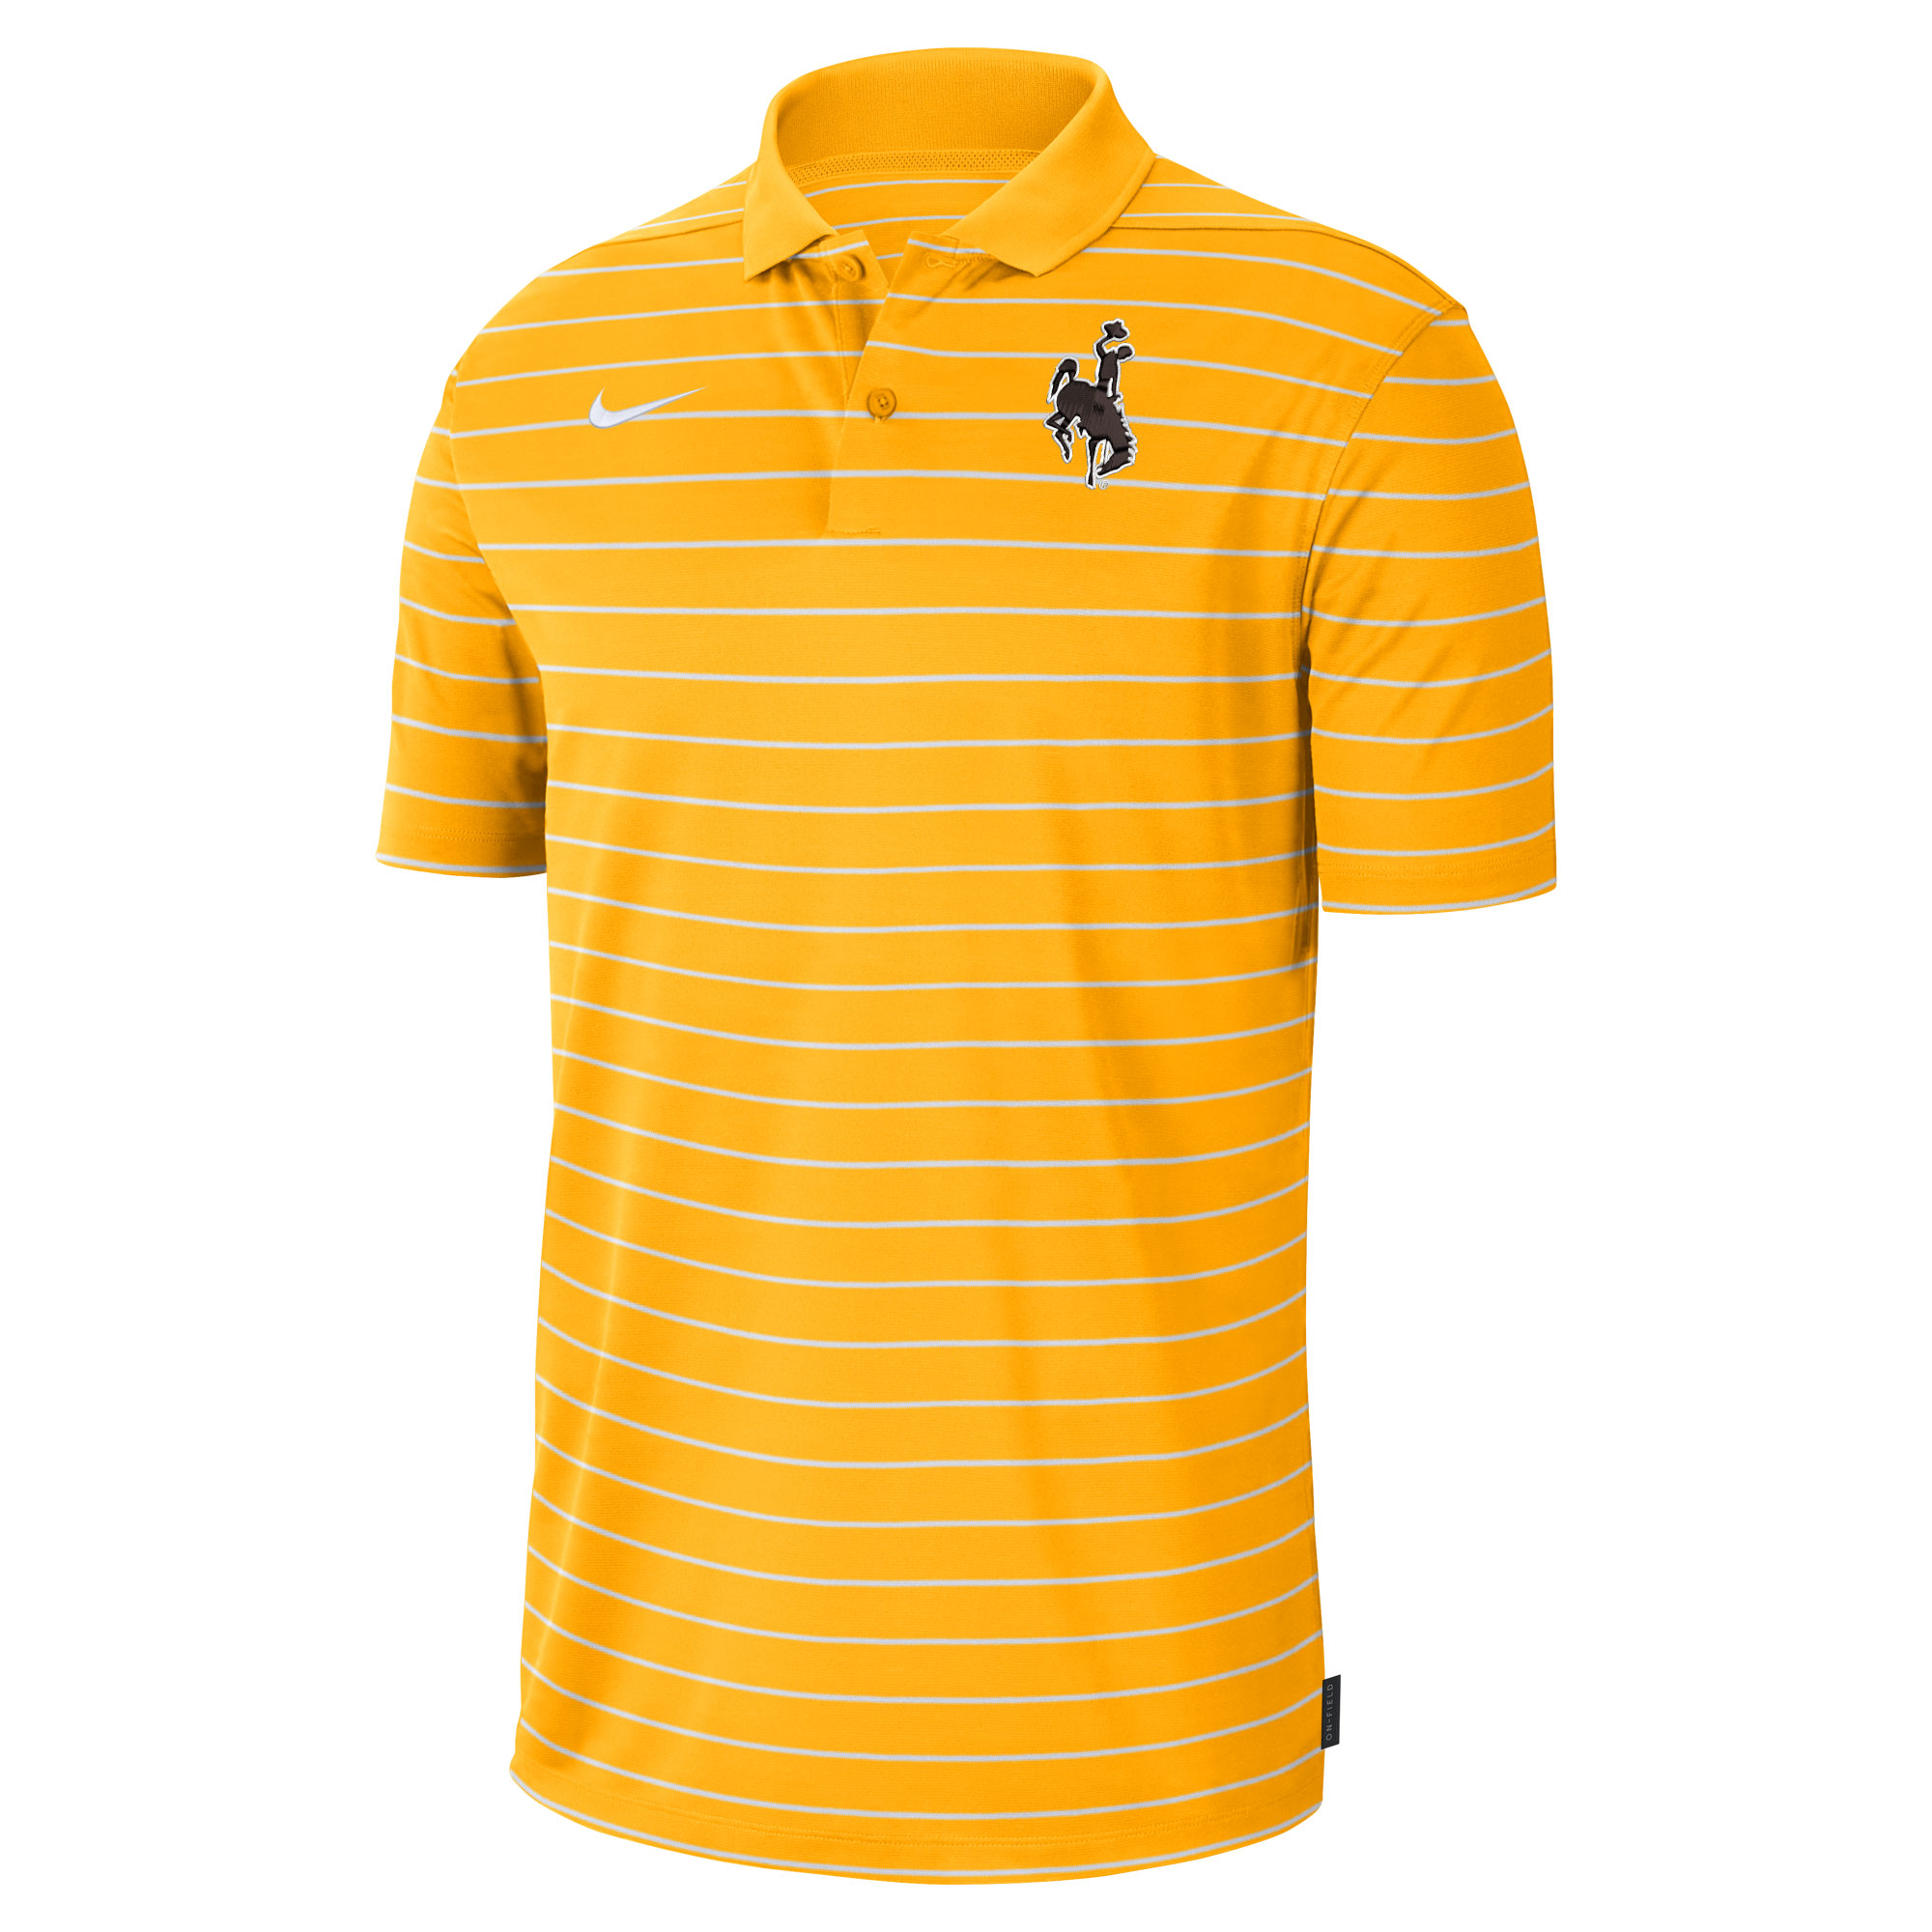 Golf Gear - University of Wyoming | Brown and Gold Outlet